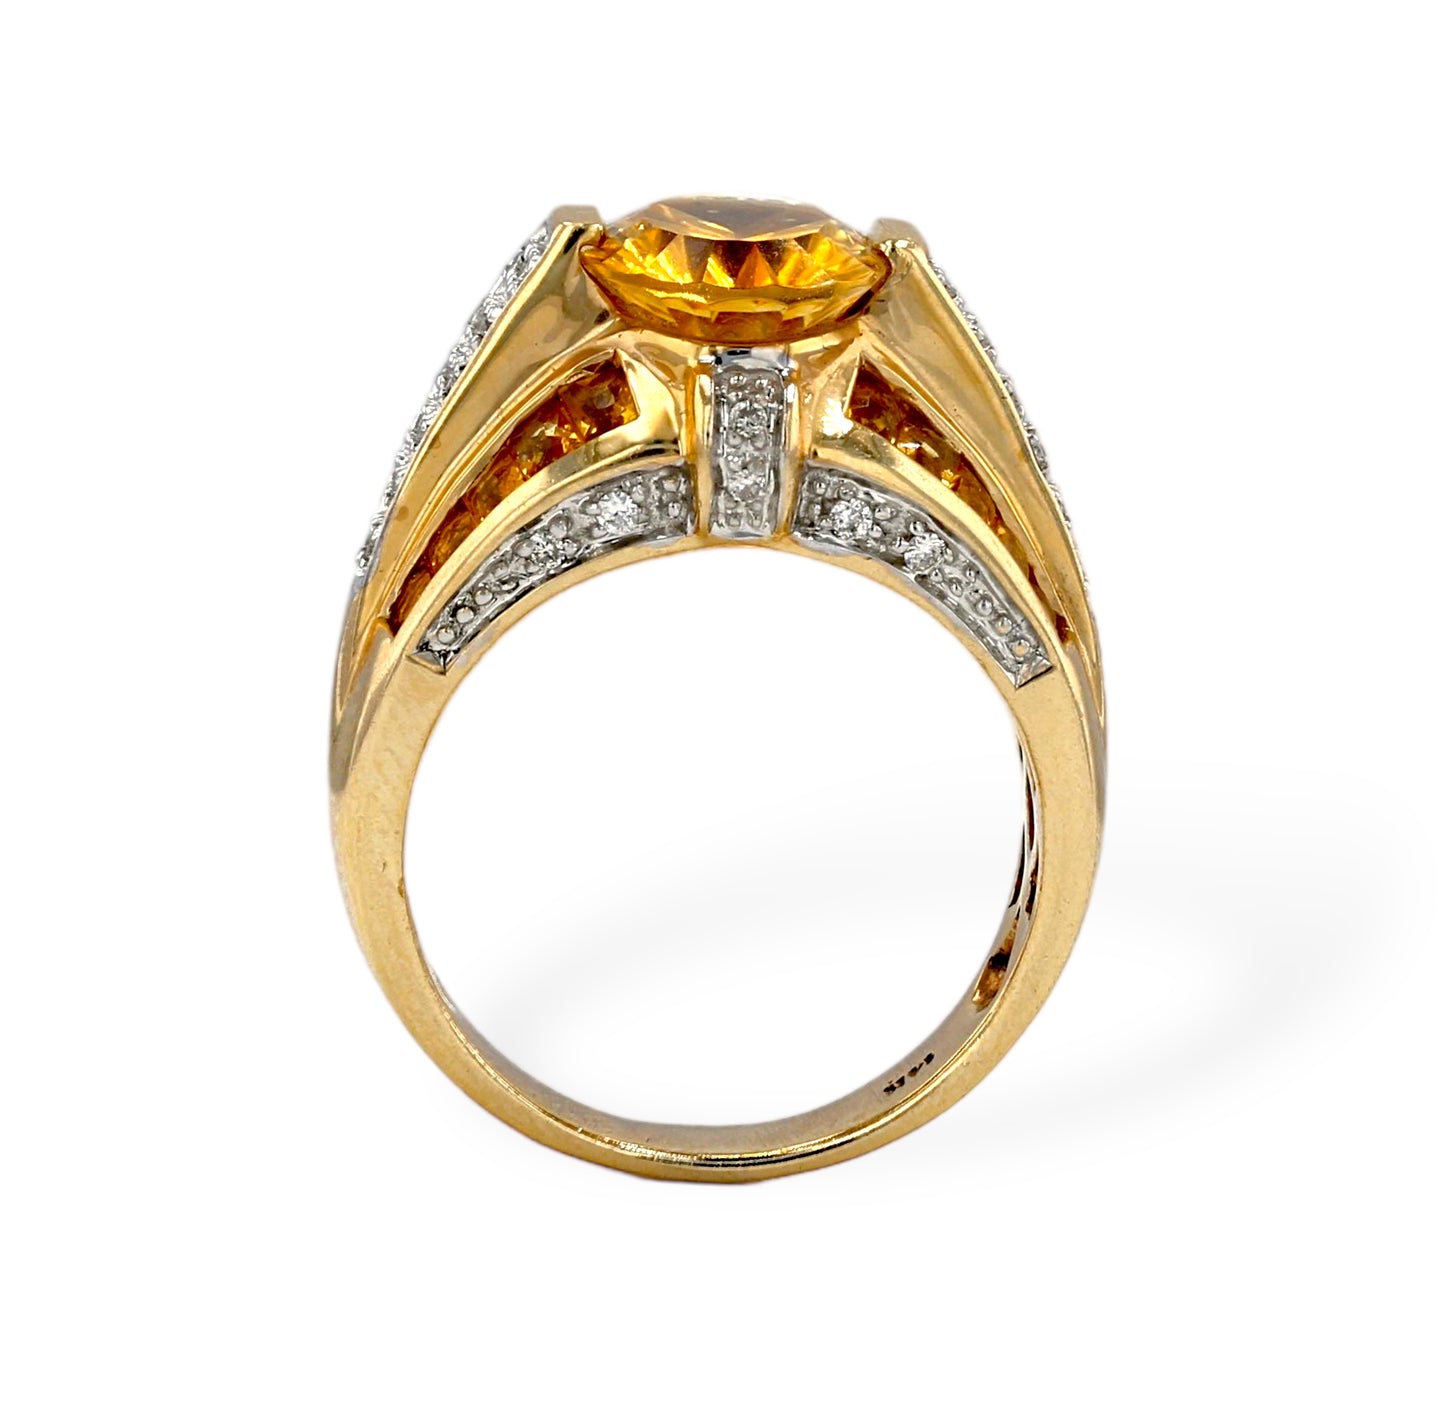 Yellow gold 14k solitaire ring